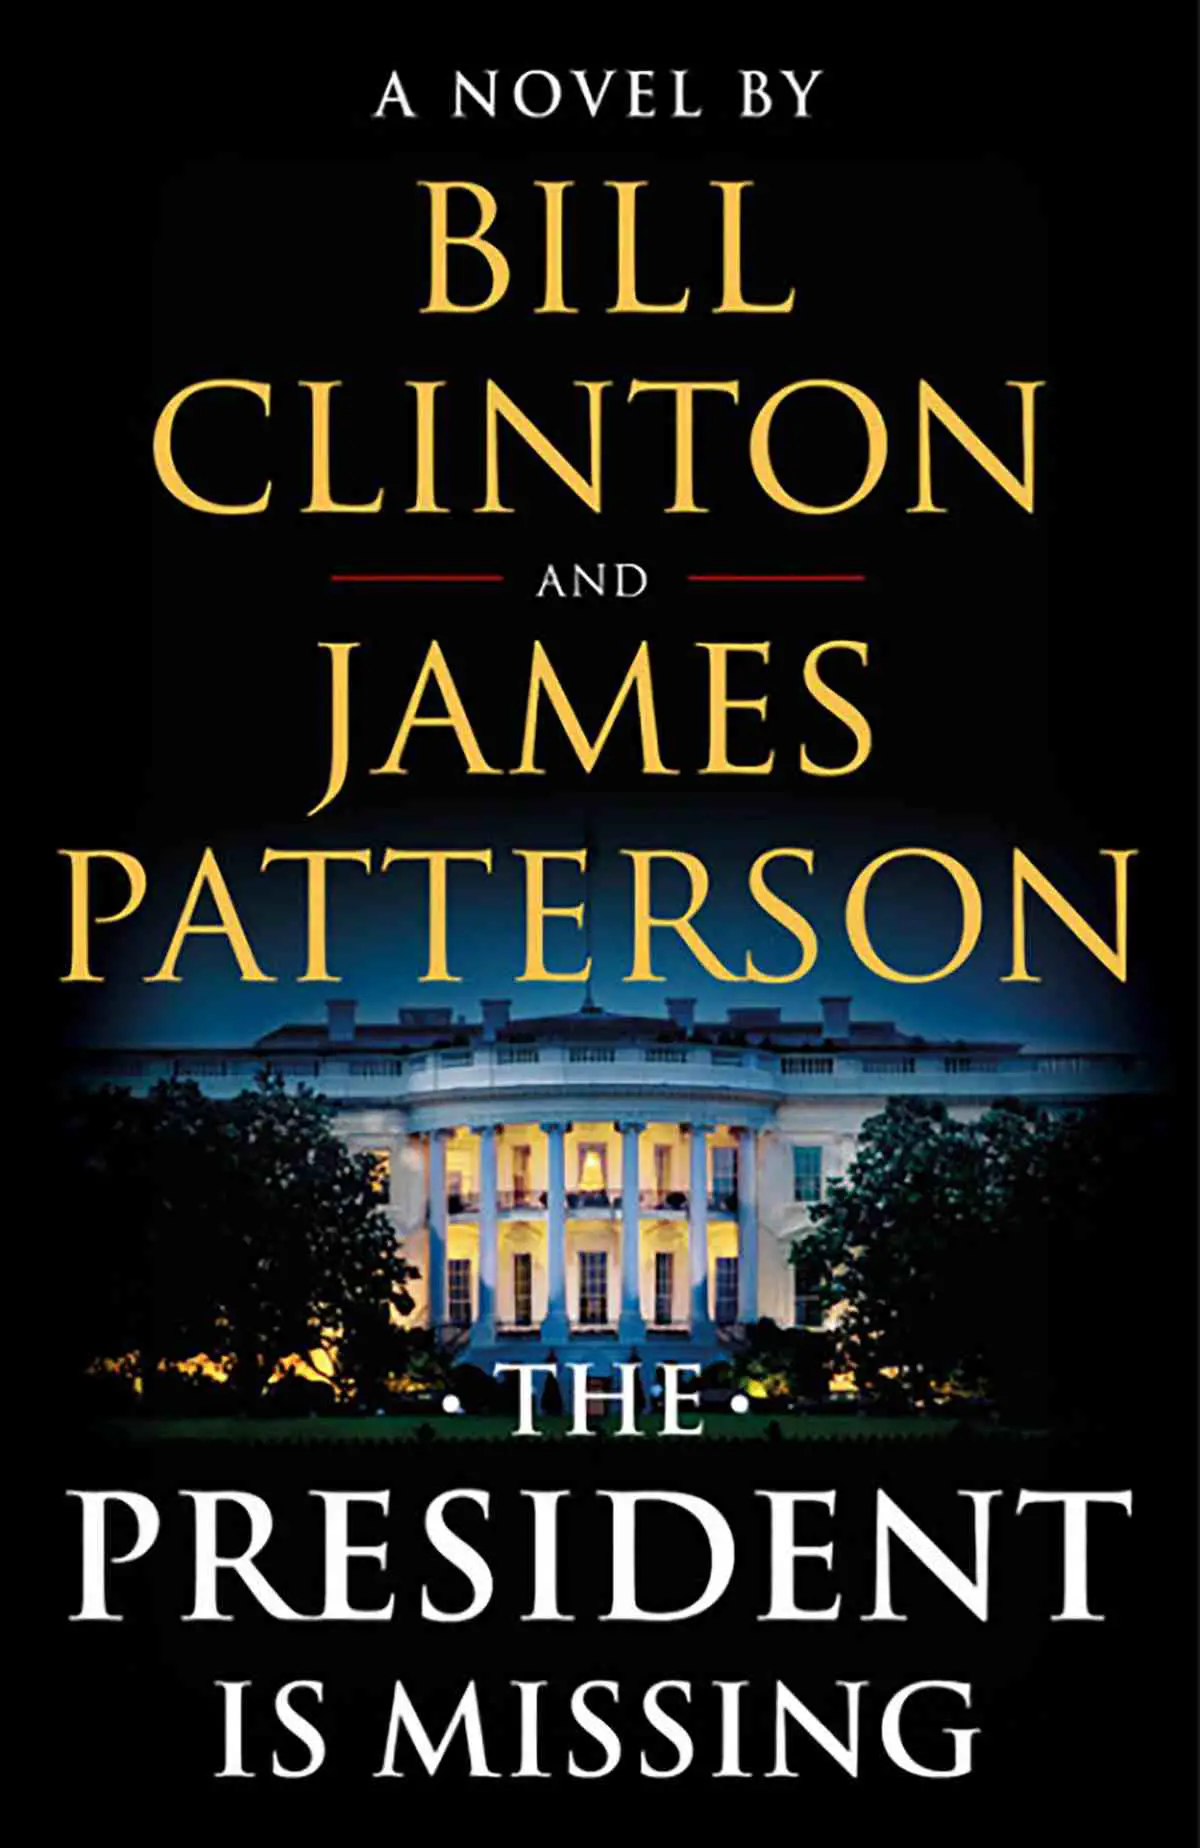 The President is Missing | Bestselling Amazon Kindle Books Of 2018